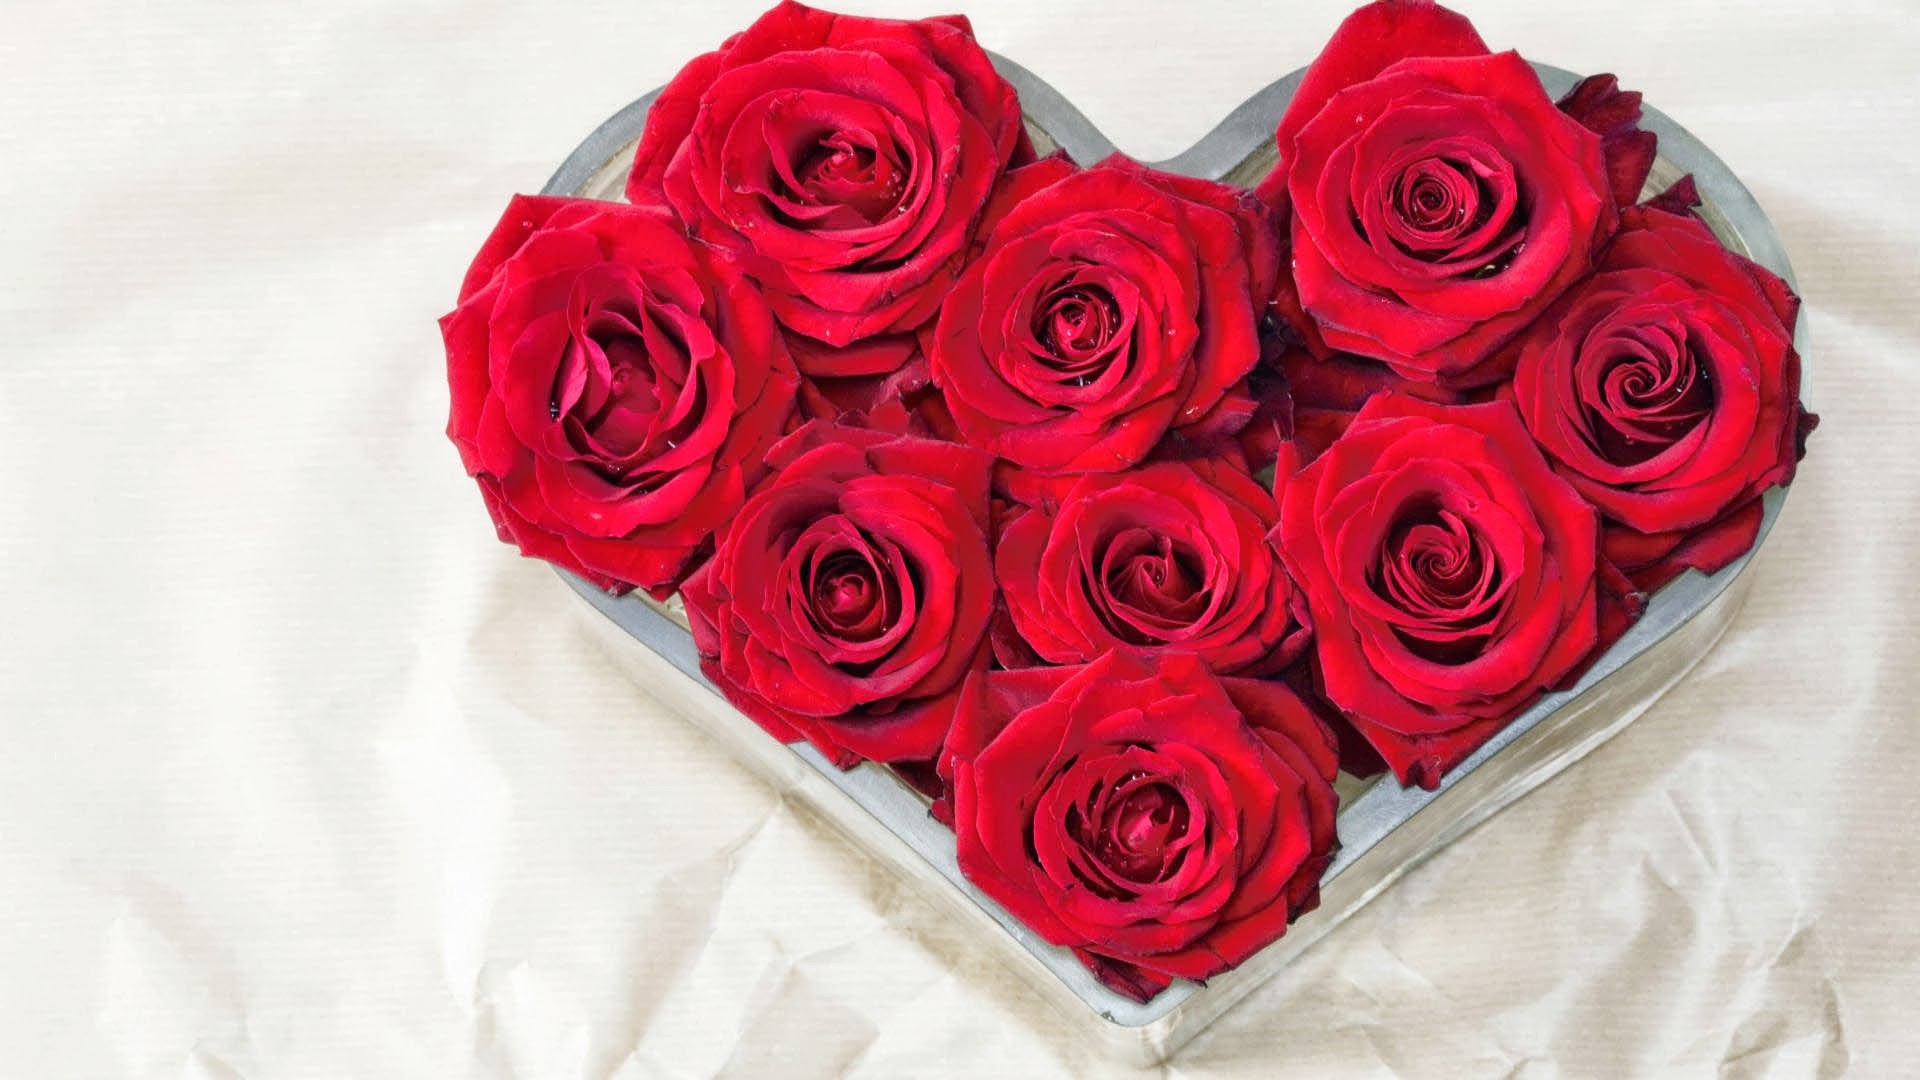 Red roses on the red silk - Love moment. Flowers 